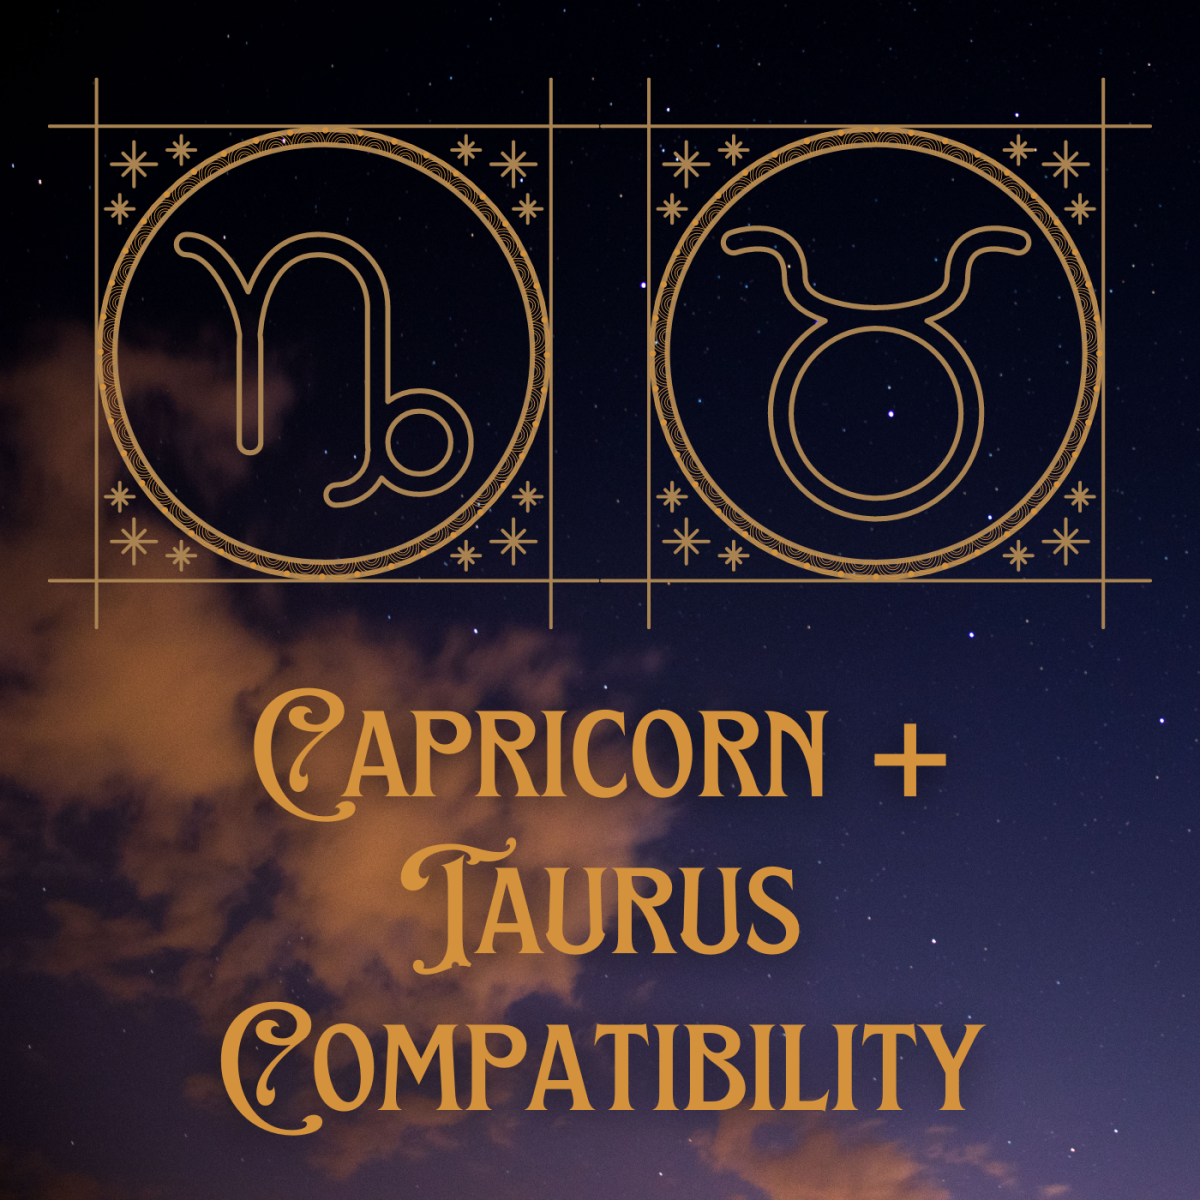 Can a Taurus and a Capricorn find harmony? Explore this astrocompatibility guide.